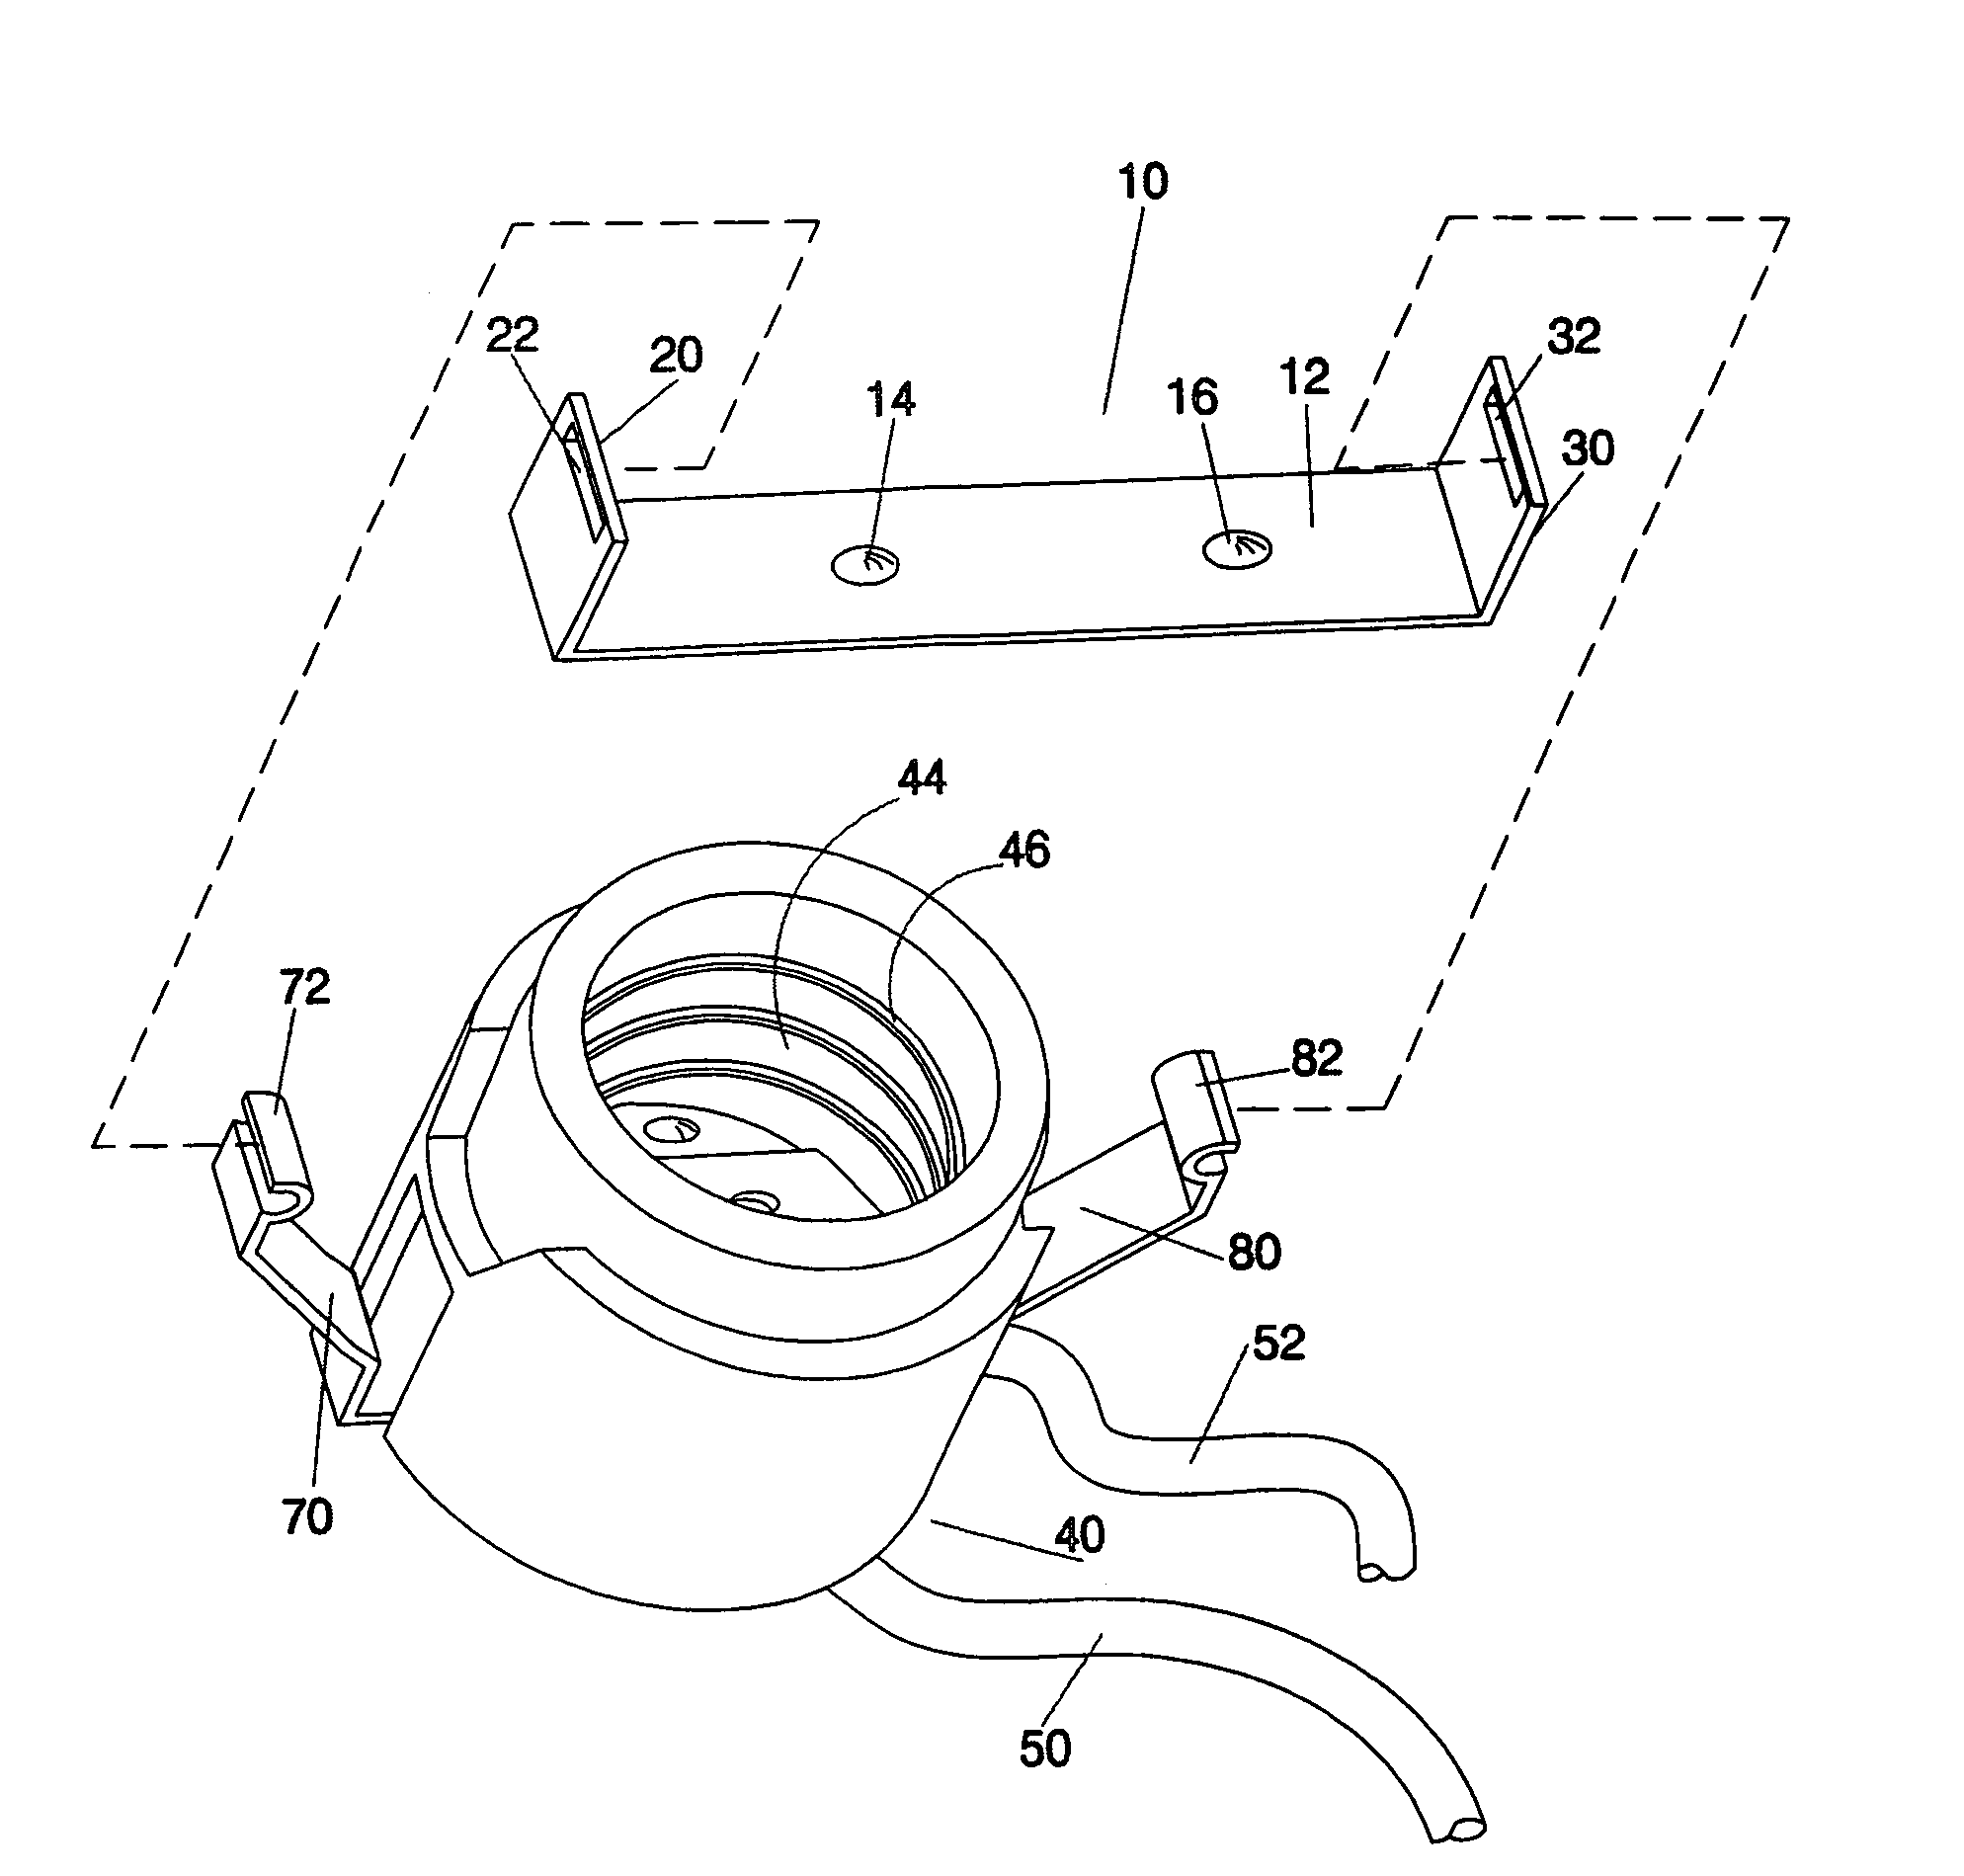 Apparatus to safely retain a lightbulb socket assembly in a ceiling fixture during shipping and rapidly converting the socket assembly for use during installation